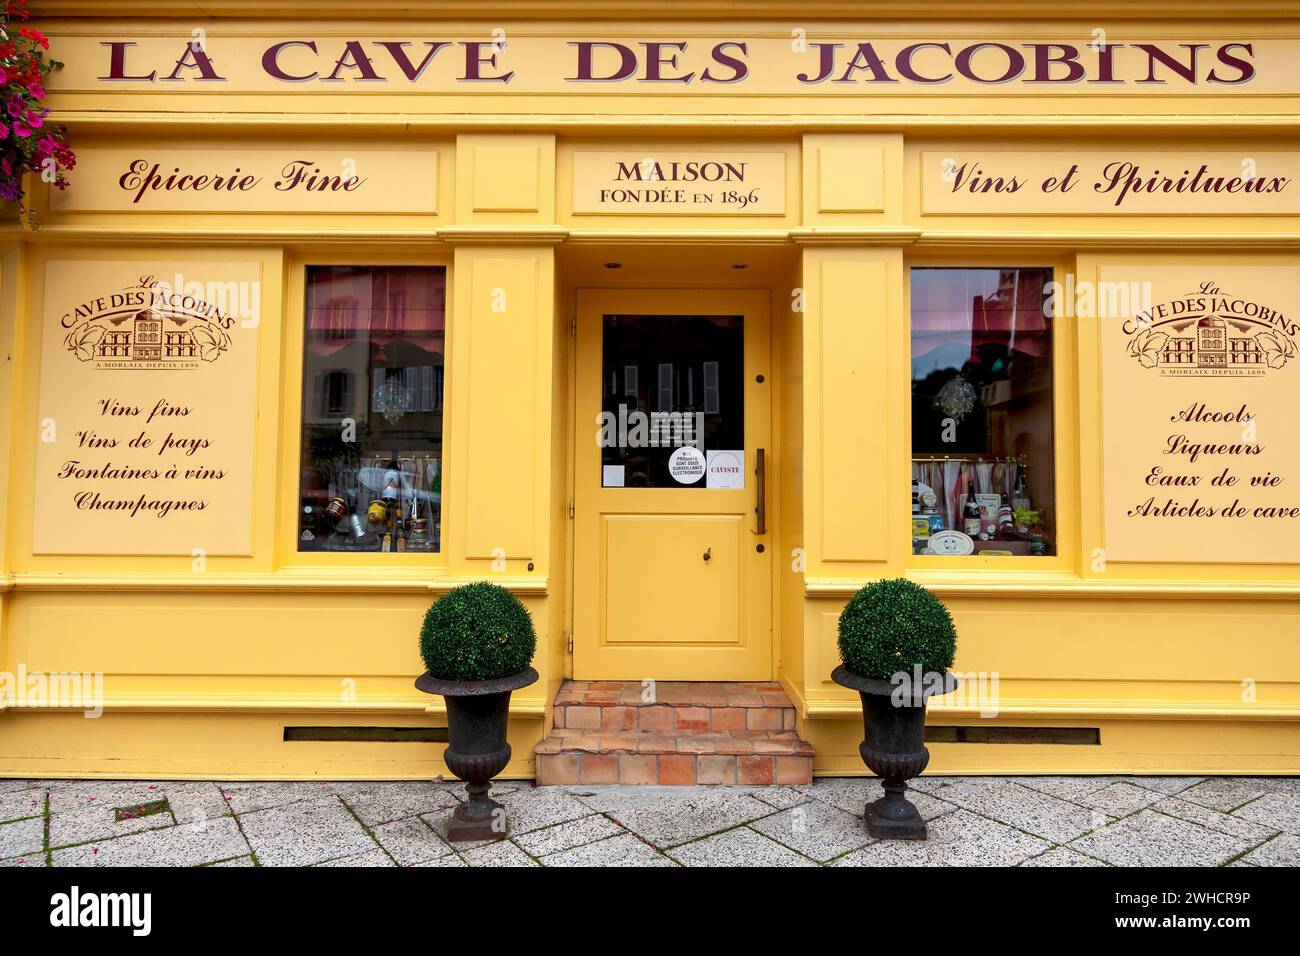 La Cave des Jacobins, The Jacobins' Cellar, wine cellar in a historic house, Morlaix, Departements Finistere, Brittany, France Stock Photo